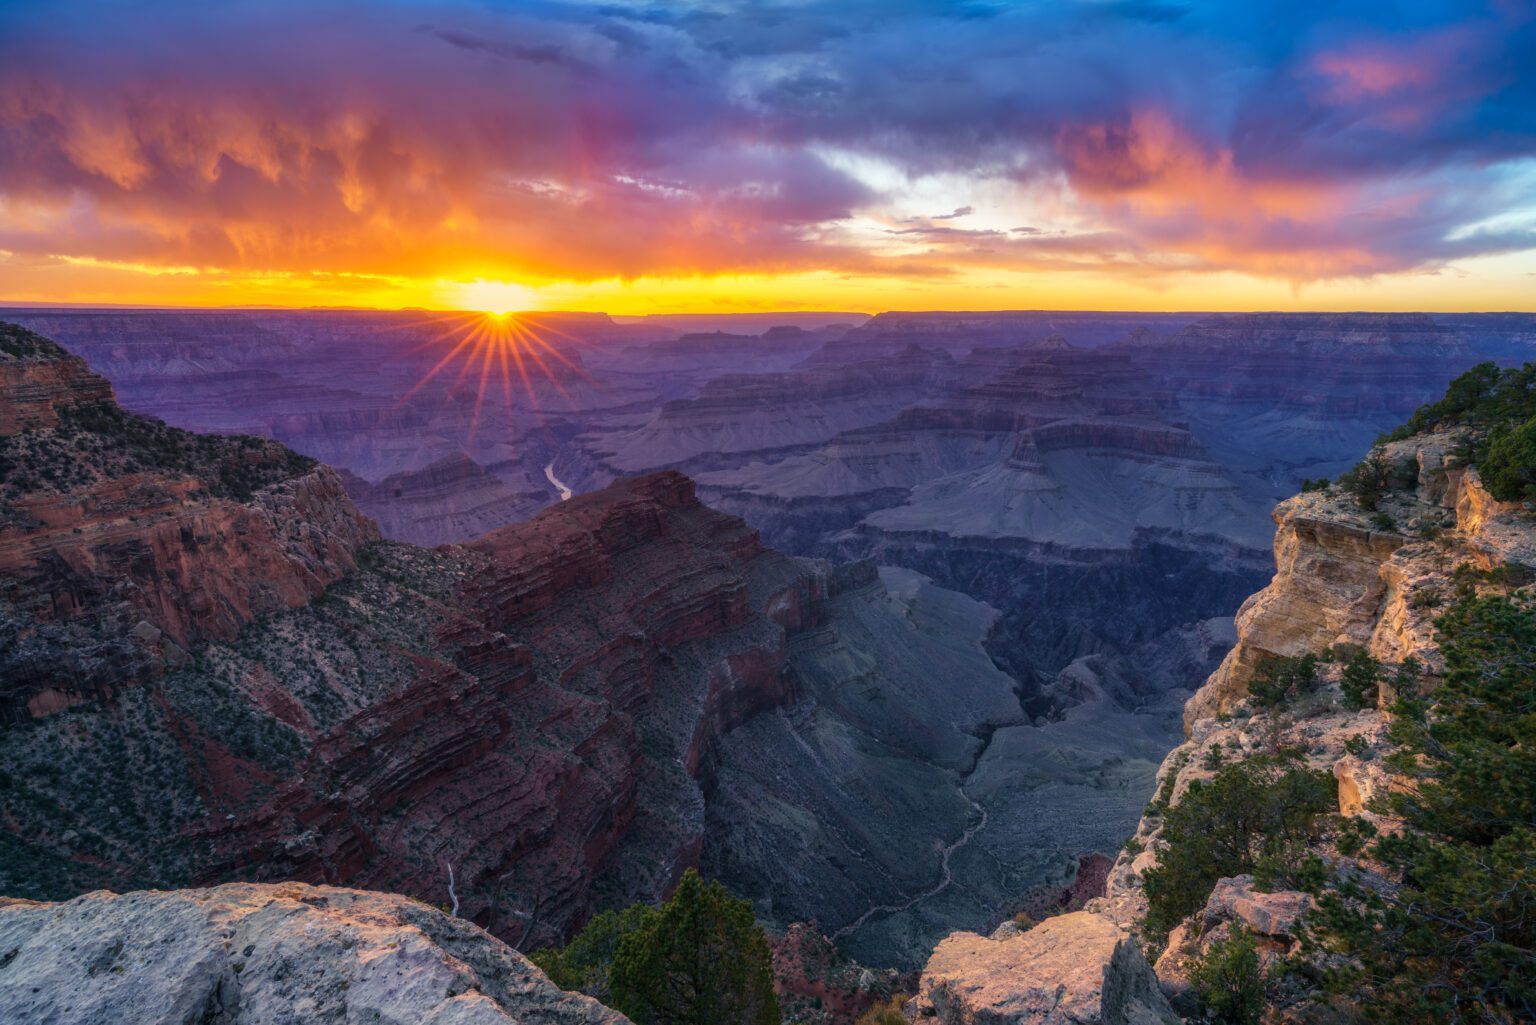 How To Plan An Amazing Grand Canyon Itinerary (2 Days)